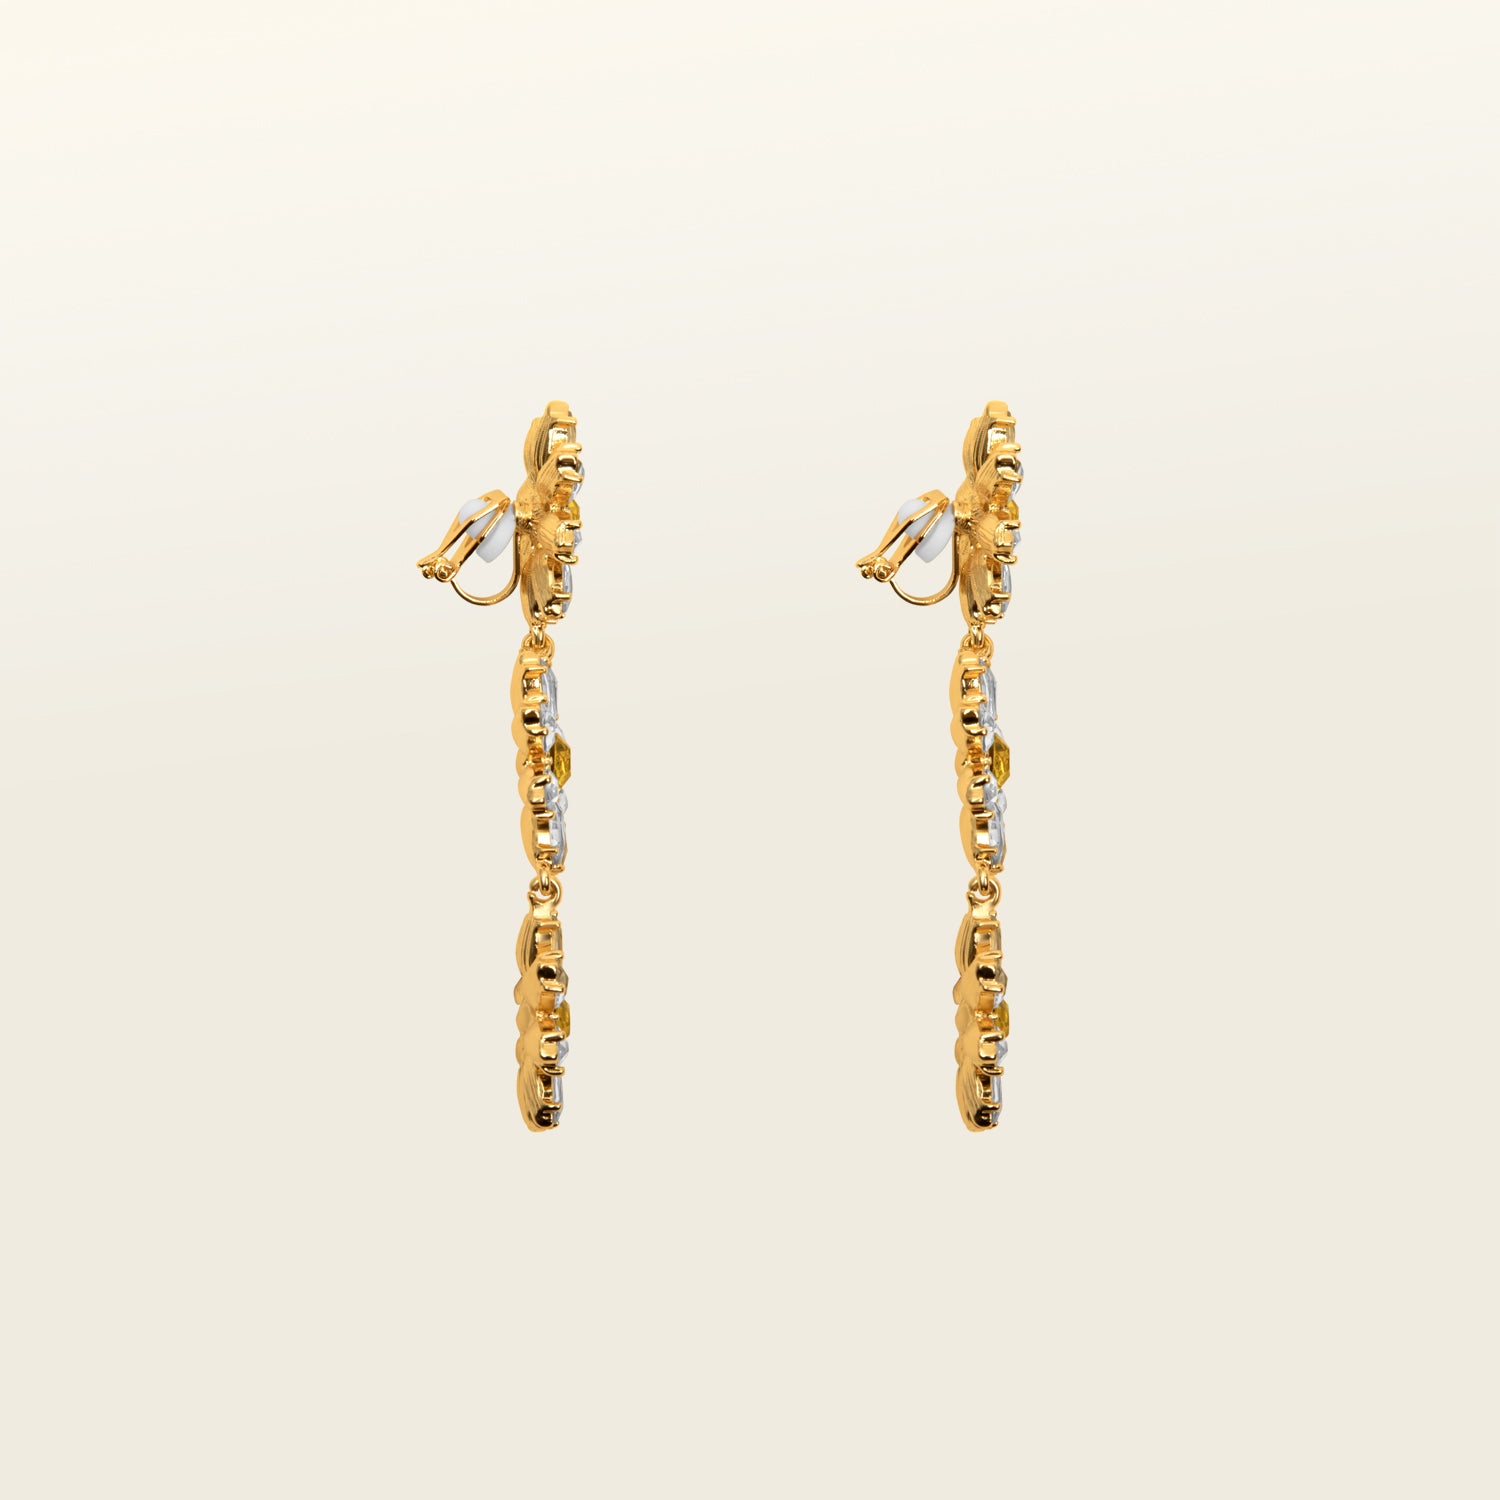 Image of the Crystal Flower Drop Clip On Earrings feature a Padded Clip-On closure, perfect for ears of larger proportions as the earrings are on the heavier side. Constructed of gold tone copper alloy and Rhinestone, with detachable rubber padding for added comfort, these earrings provide up to 8-12 hours of easy wear. Sold as one single pair.